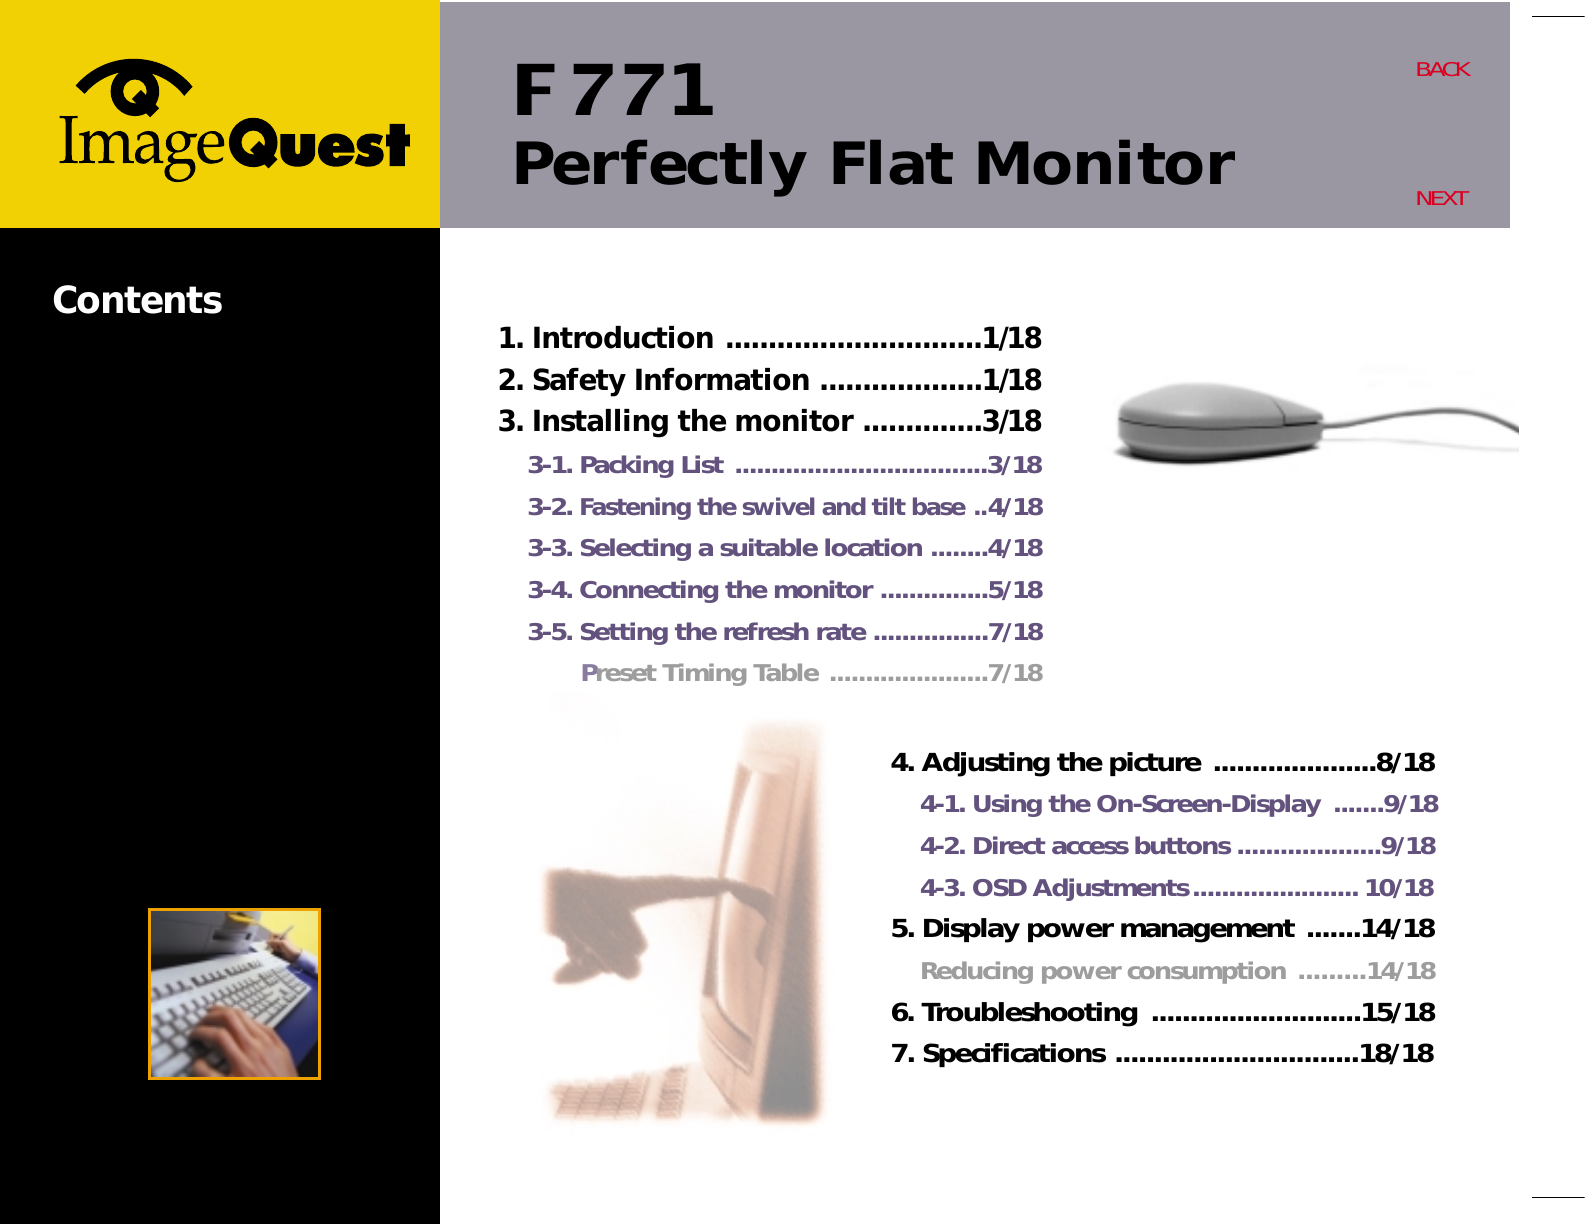 F 771Perfectly Flat MonitorBACKNEXTContents 1. Introduction ..............................1/182. Safety Information ...................1/183. Installing the monitor ..............3/183-1. Packing List ...................................3/183-2. Fastening the swivel and tilt base ..4/183-3. Selecting a suitable location ........4/183-4. Connecting the monitor ...............5/183-5. Setting the refresh rate ................7/18Preset Timing Table ......................7/184. Adjusting the picture .....................8/184-1. Using the On-Screen-Display .......9/184-2. Direct access buttons ....................9/184-3. OSD Adjustments....................... 10/185. Display power management .......14/18Reducing power consumption .........14/186. Troubleshooting ...........................15/187. Specifications ...............................18/18